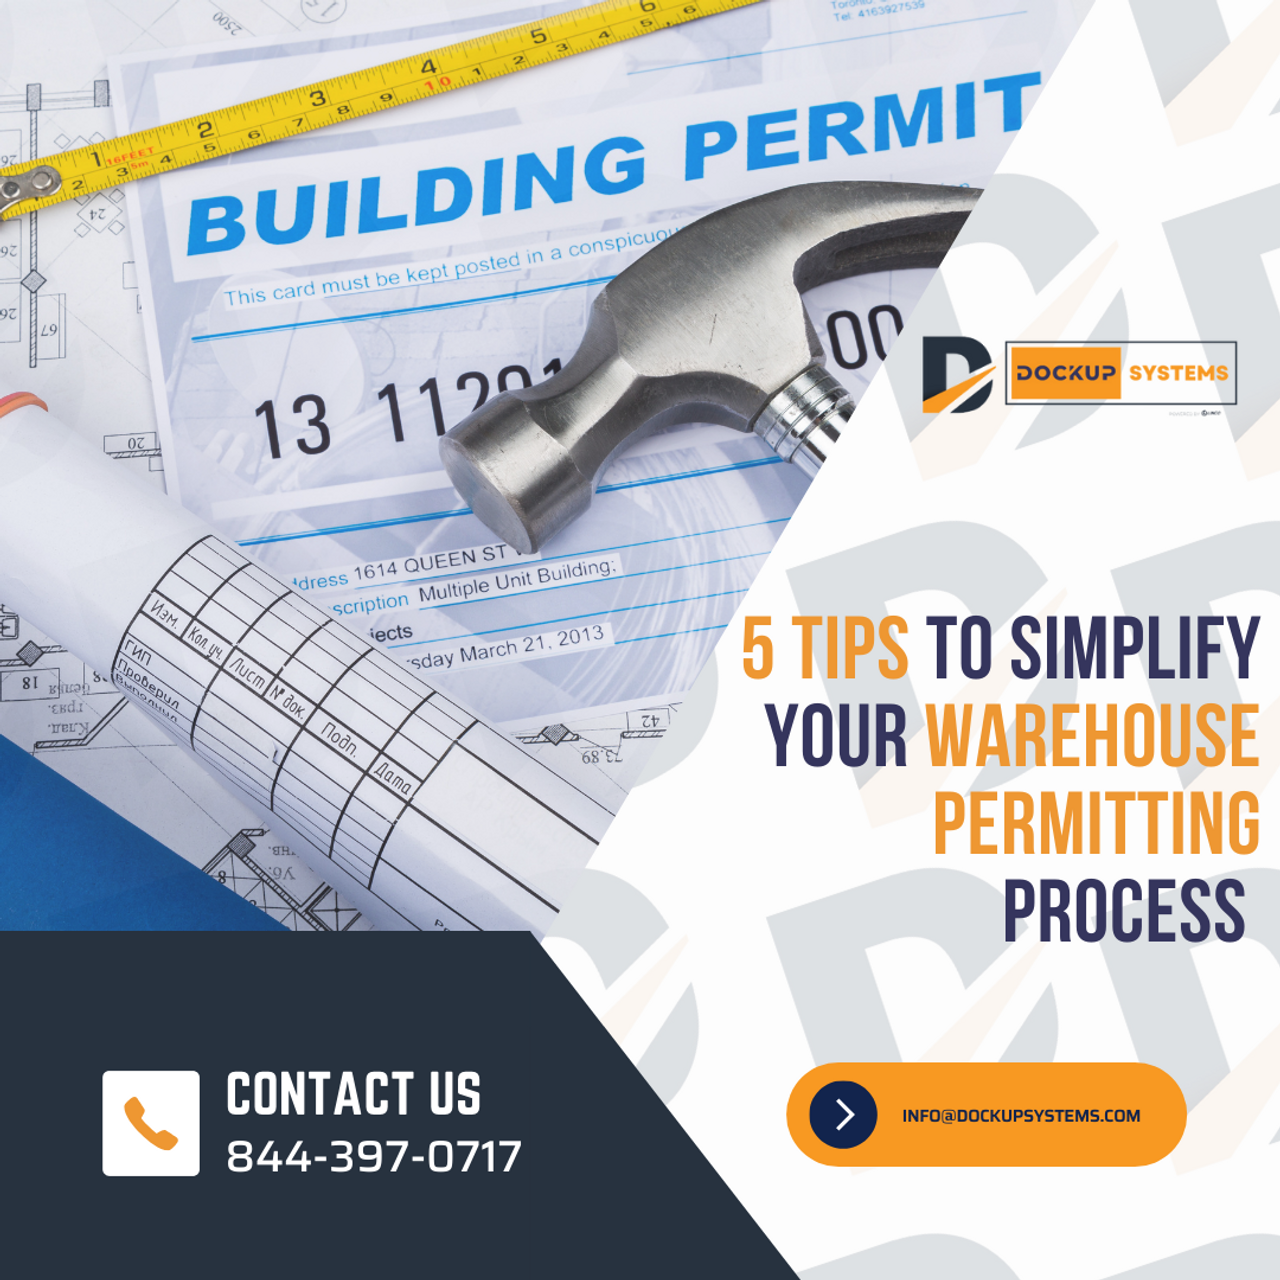 5 Tips To Simplify Your Warehouse Permitting Process - DockUp Systems